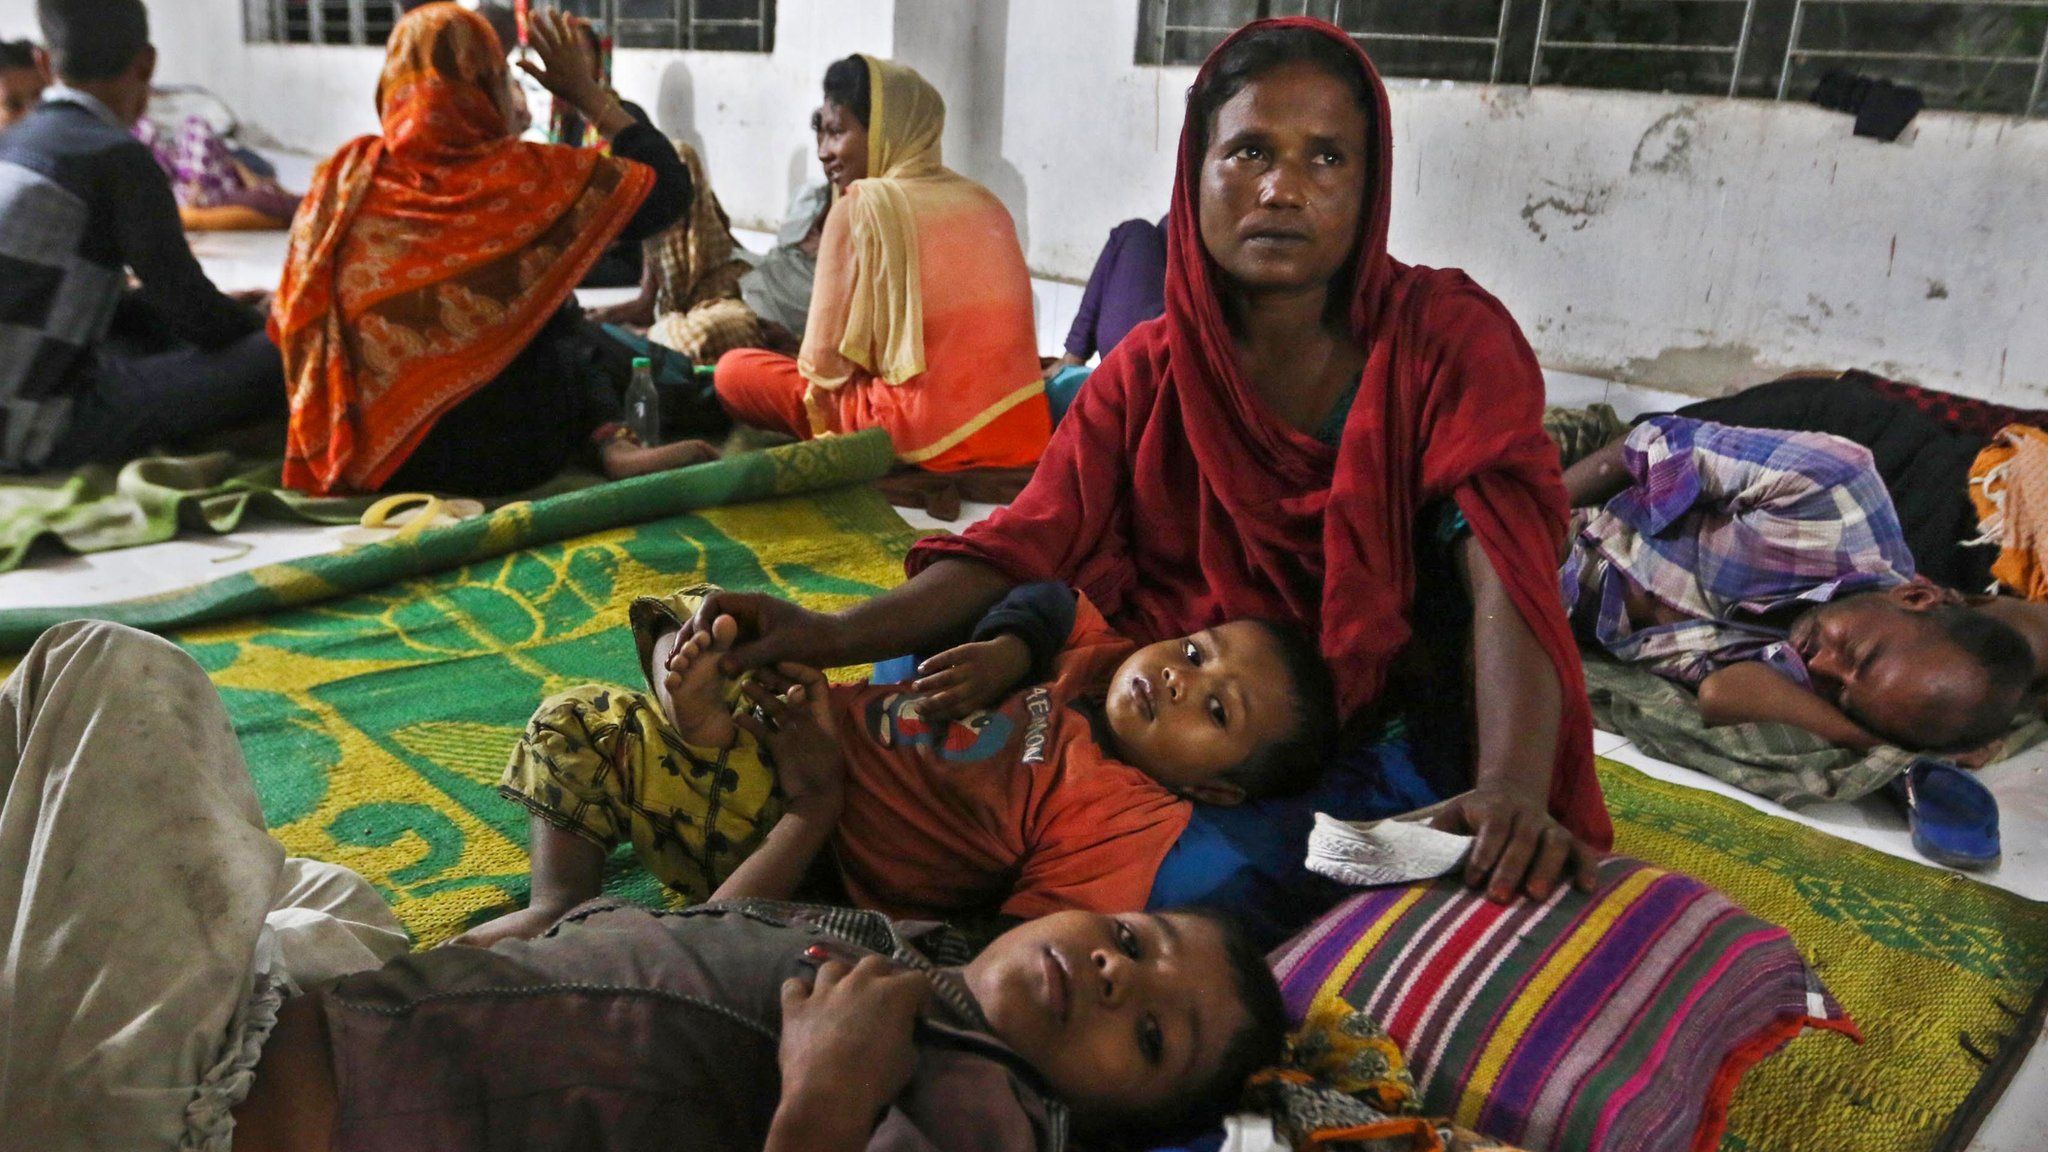 Bangladeshi villagers take refuge in a cyclone shelter following an evacuation by authorities in the coastal villages of the Cox"s Bazar district on May 29, 2017 as Cyclone "Mora" gradually approaches towards the coastline